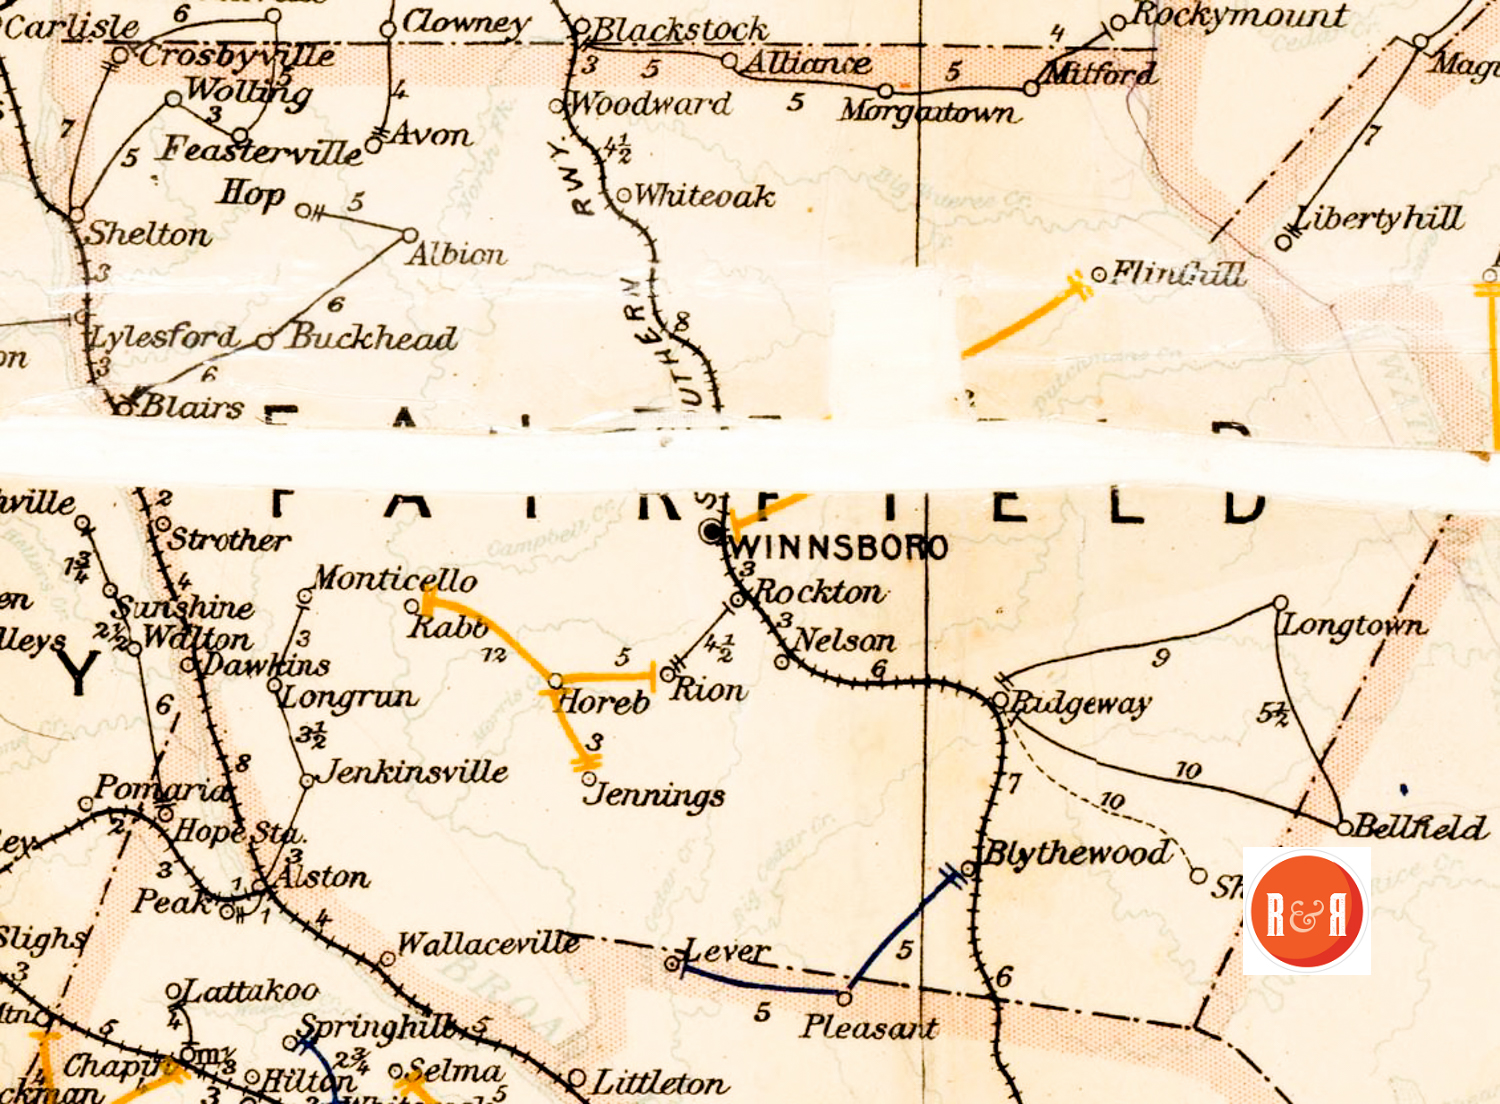 Old Post Office Map of Fairfield Co., S.C. 